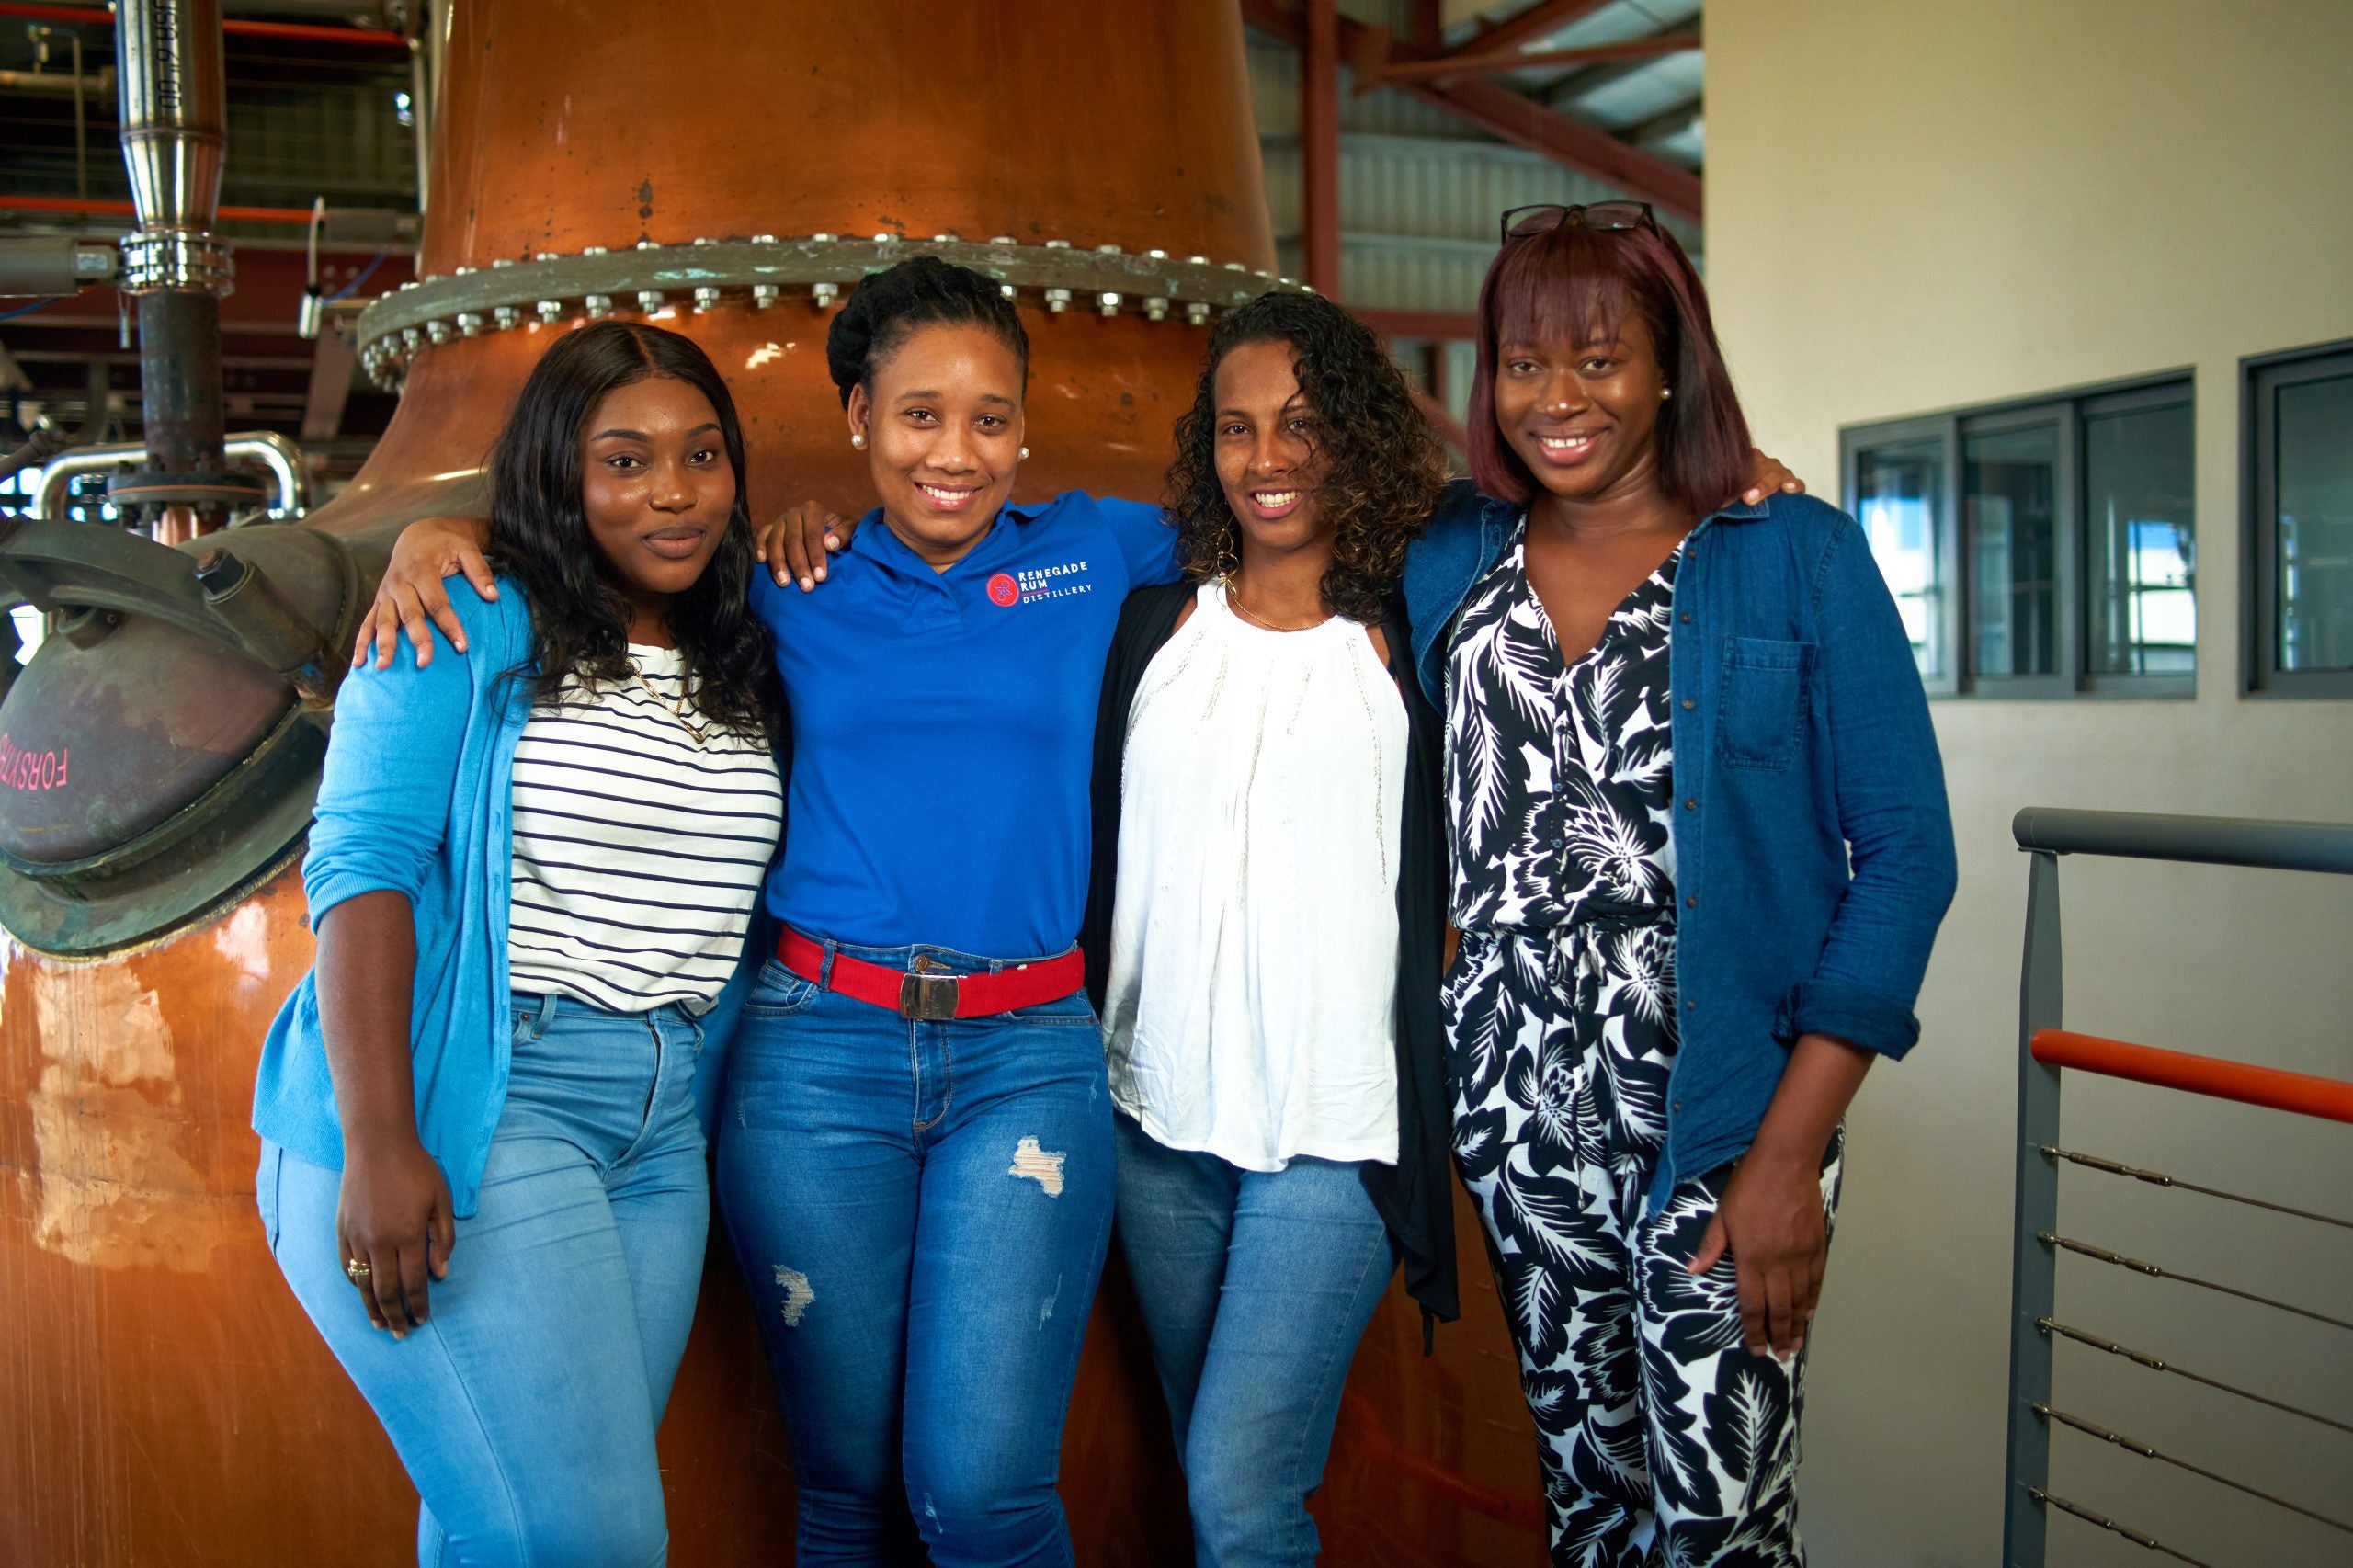  We’ll Drink To That: Meet The History-Making Distillers Team Run By Black Women Making An Impact Along With Rum